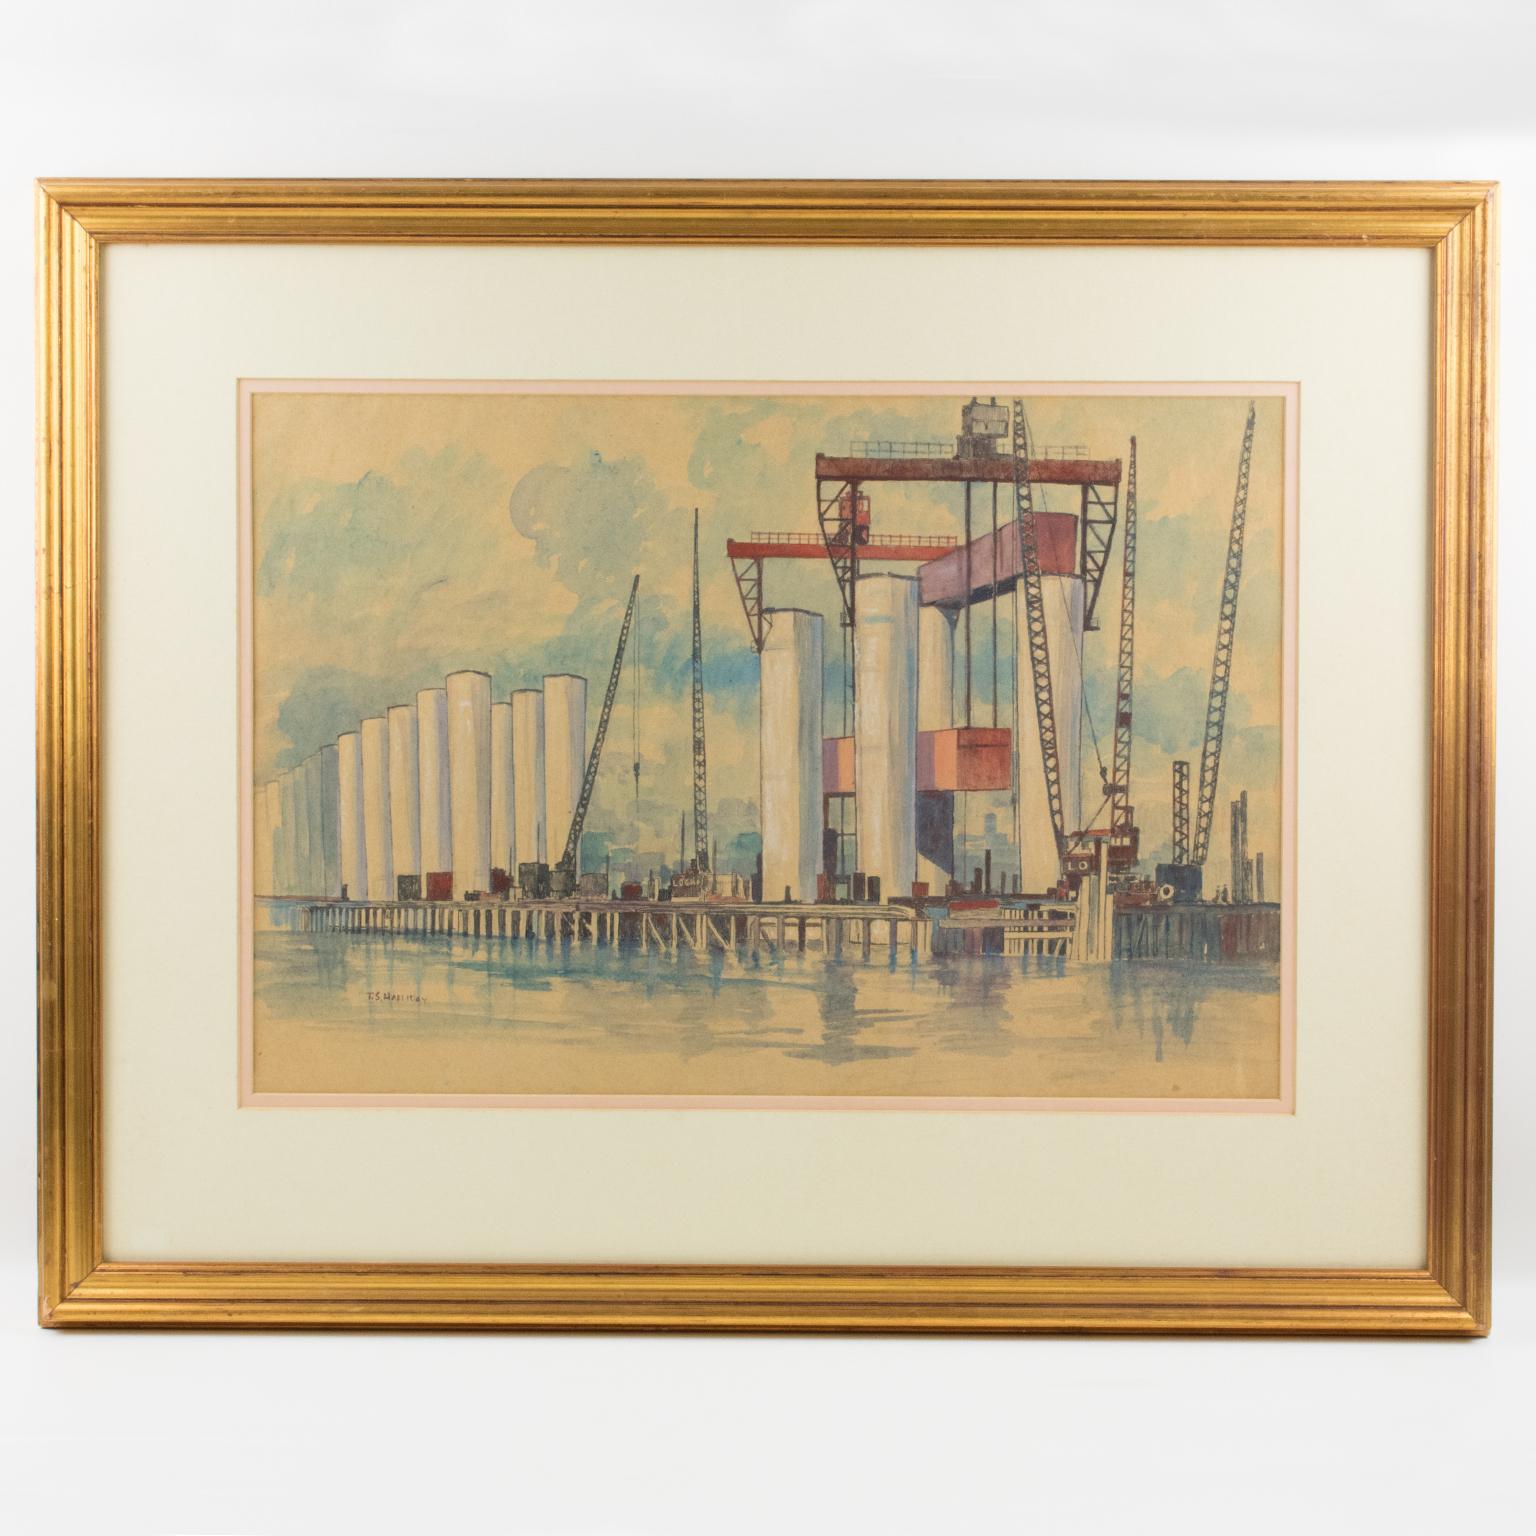 Pastel and ink painting on Vellum paper by Thomas Symington Halliday (1902 - 1998), titled: Bridge Construction, and signed bottom left corner: T.S. Halliday.
This interesting industrial composition likely features the construction of a bridge in